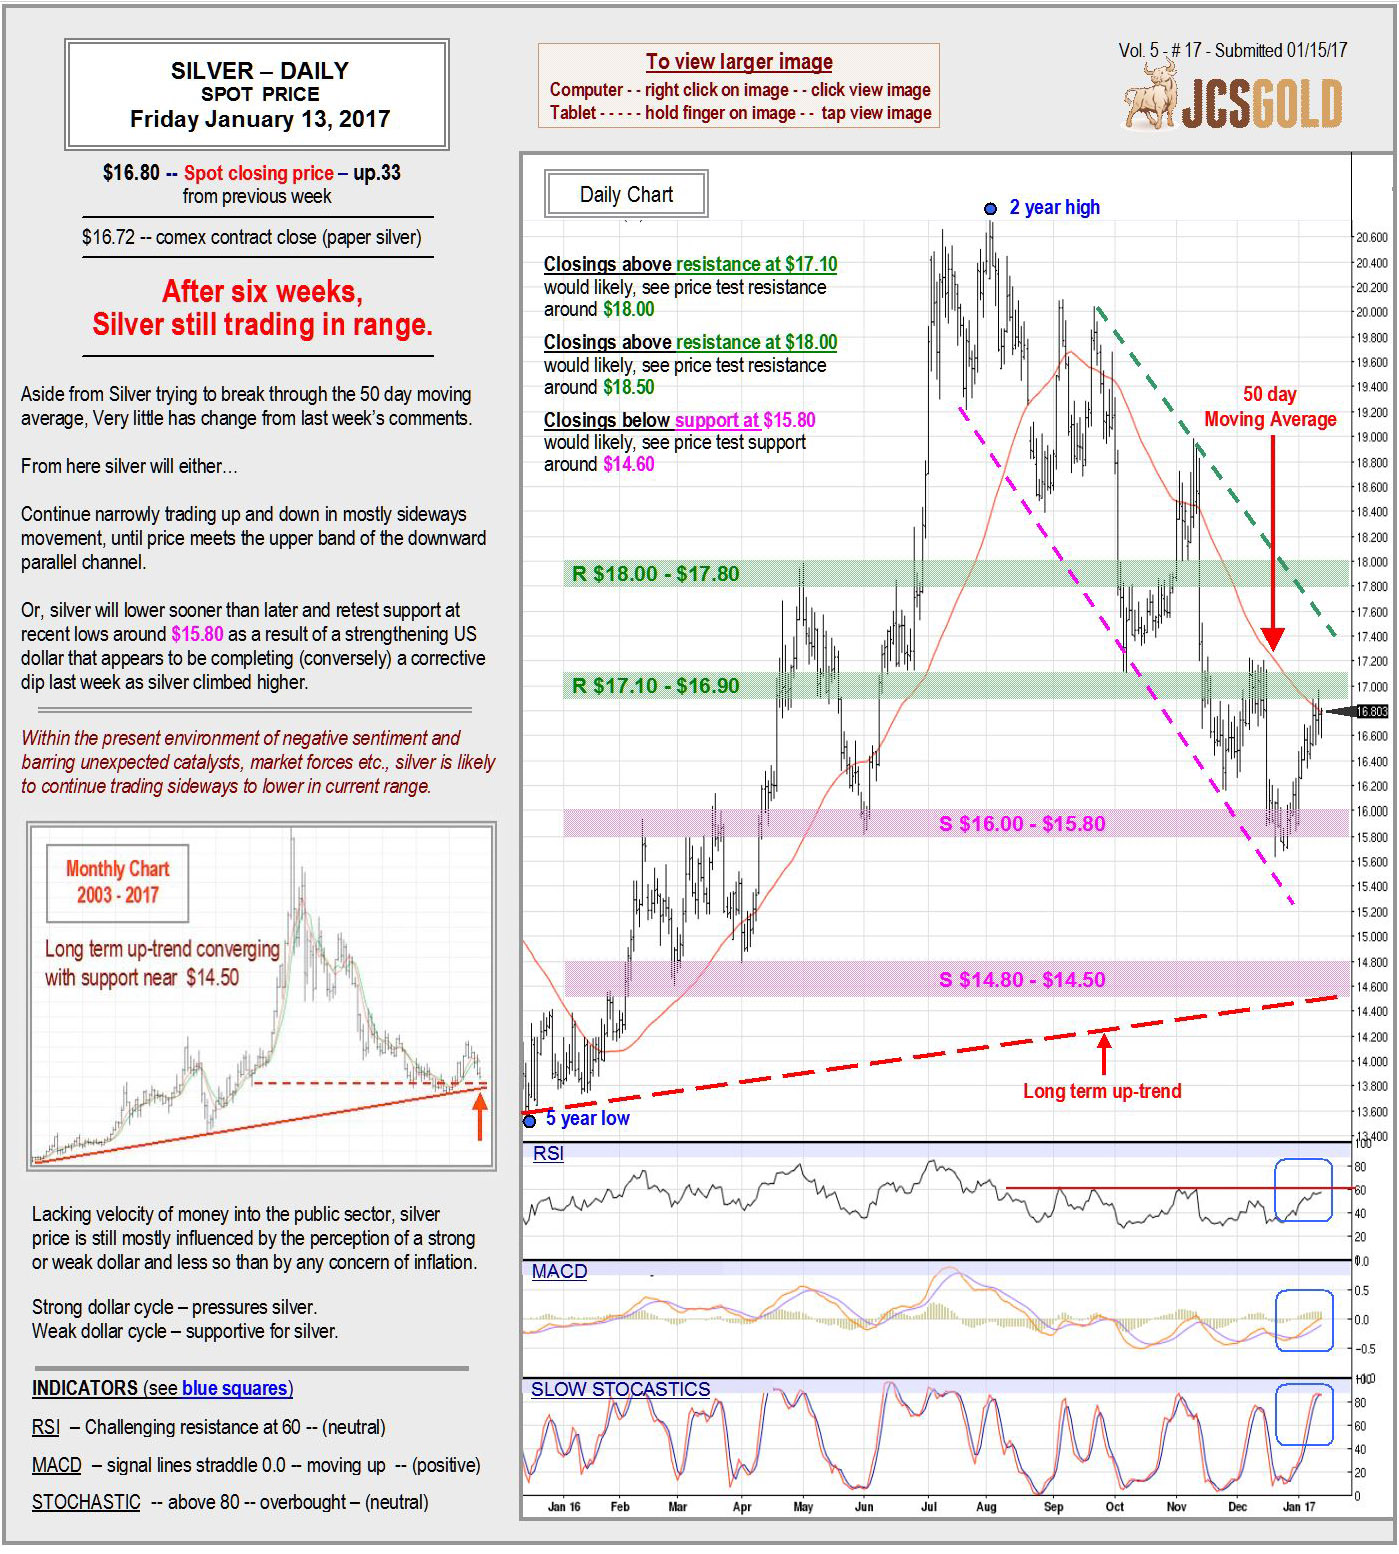 Silver Jan 13, 2017 chart & commentary